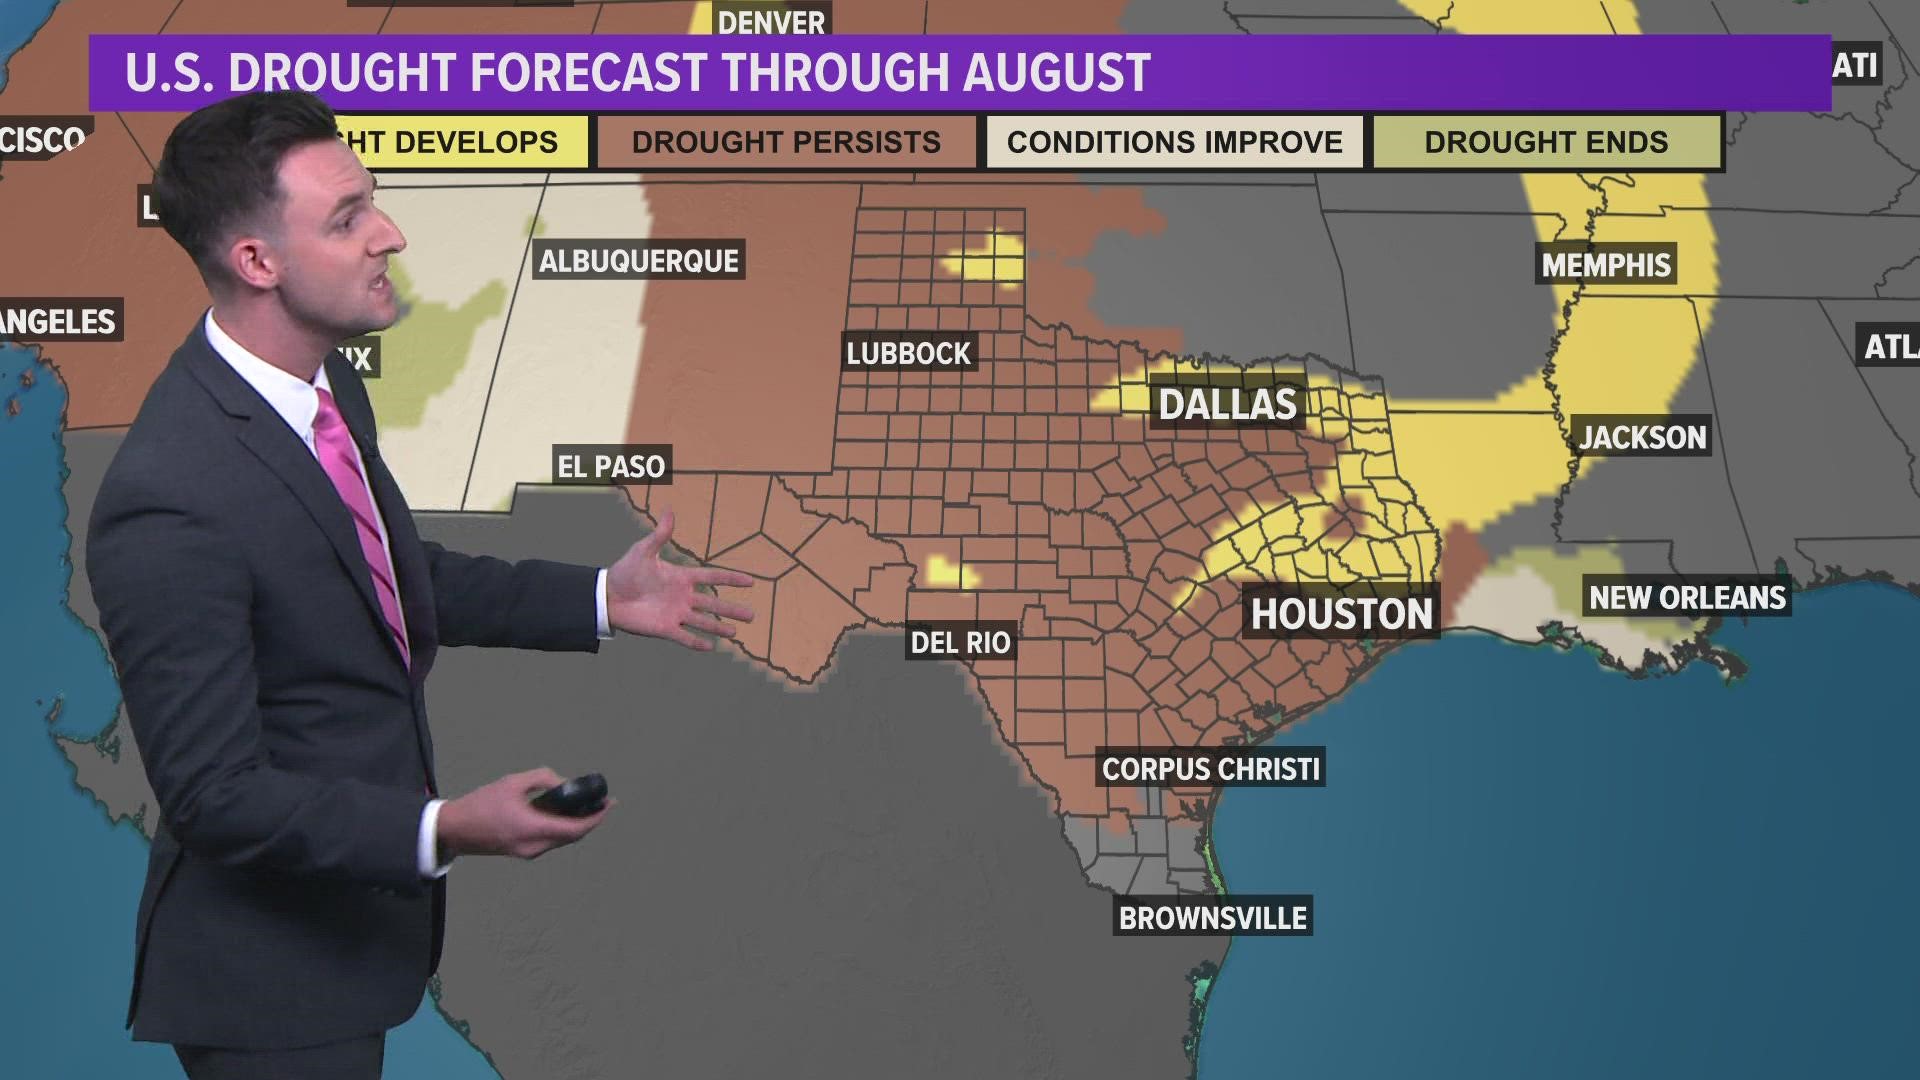 Hot conditions and no rain is making for drought conditions across parts of the country, including Texas.